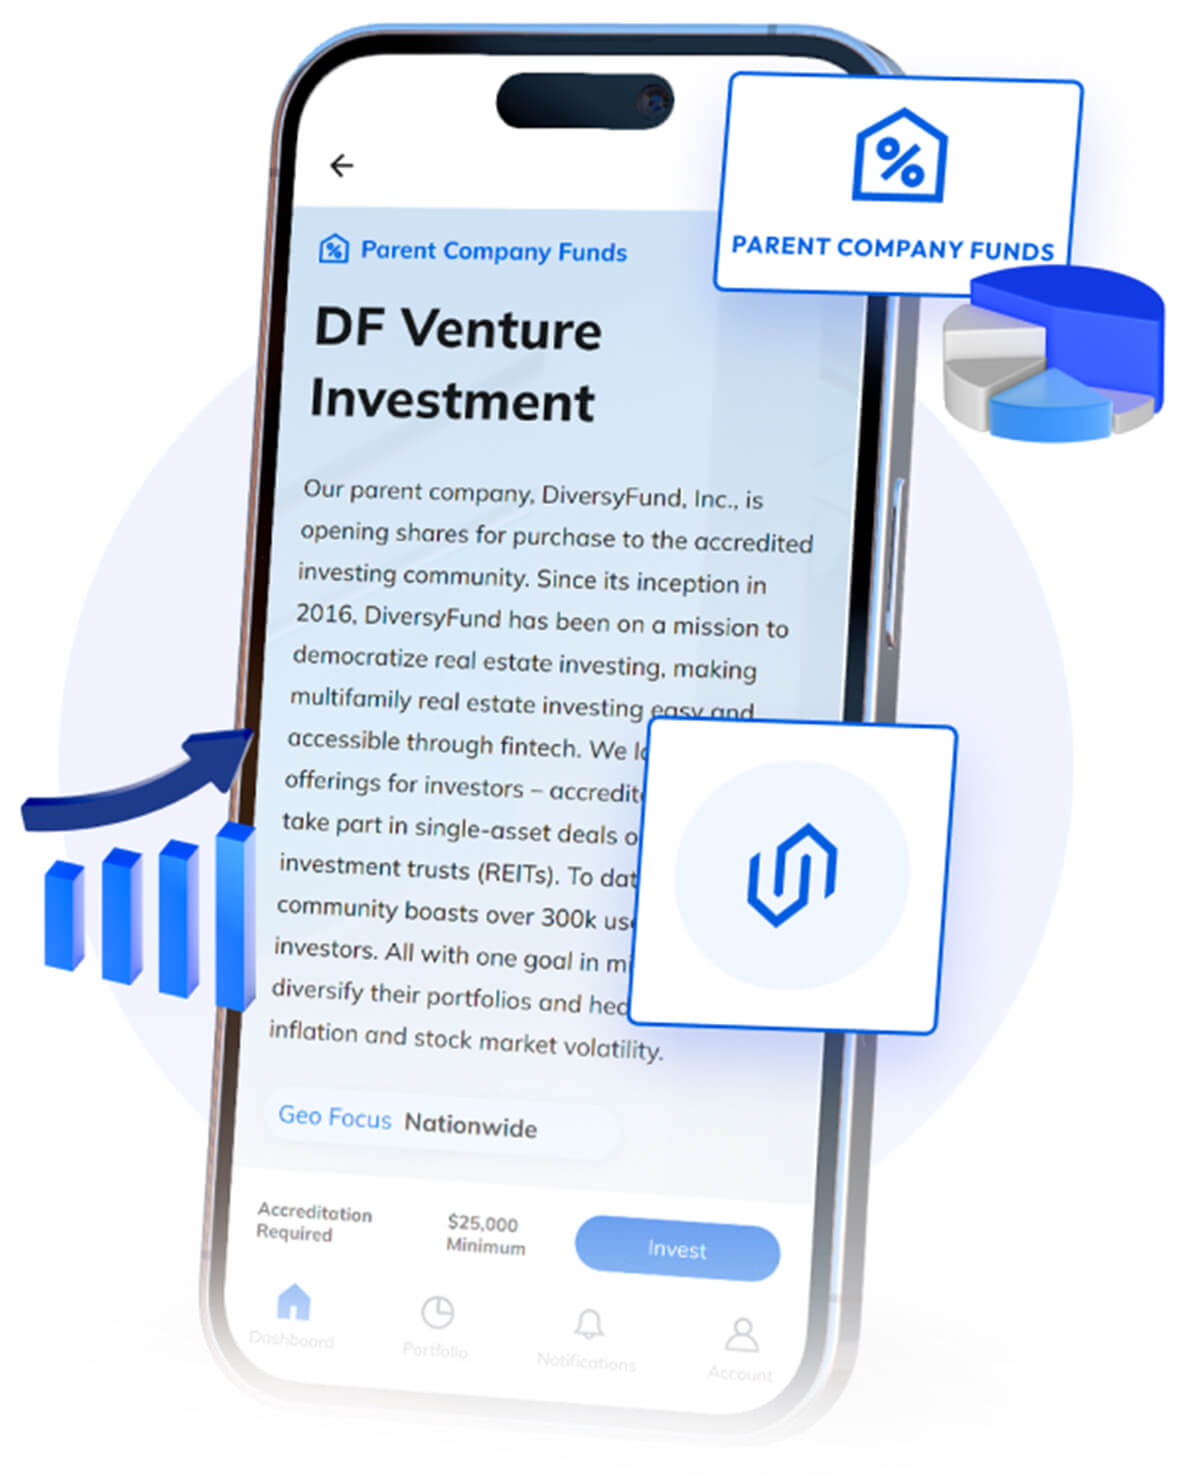 Phone screen showing DiversyFund Venture Investment opportunity for all investors